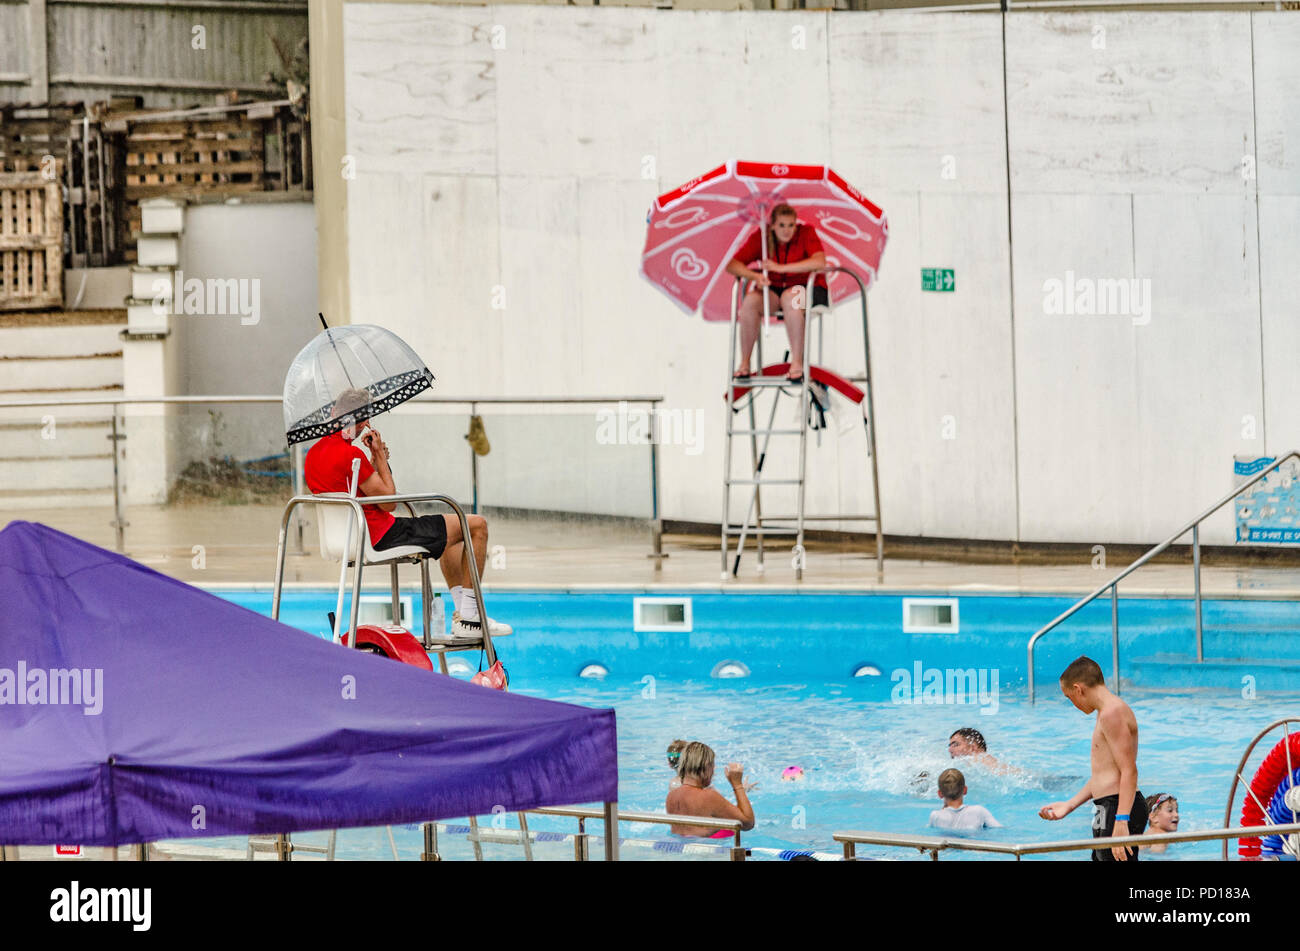 sunbathers and swimmers take refuge as the long dry spell is broken with a heavy downpour at Saltdean Lido, East Sussex. Stock Photo